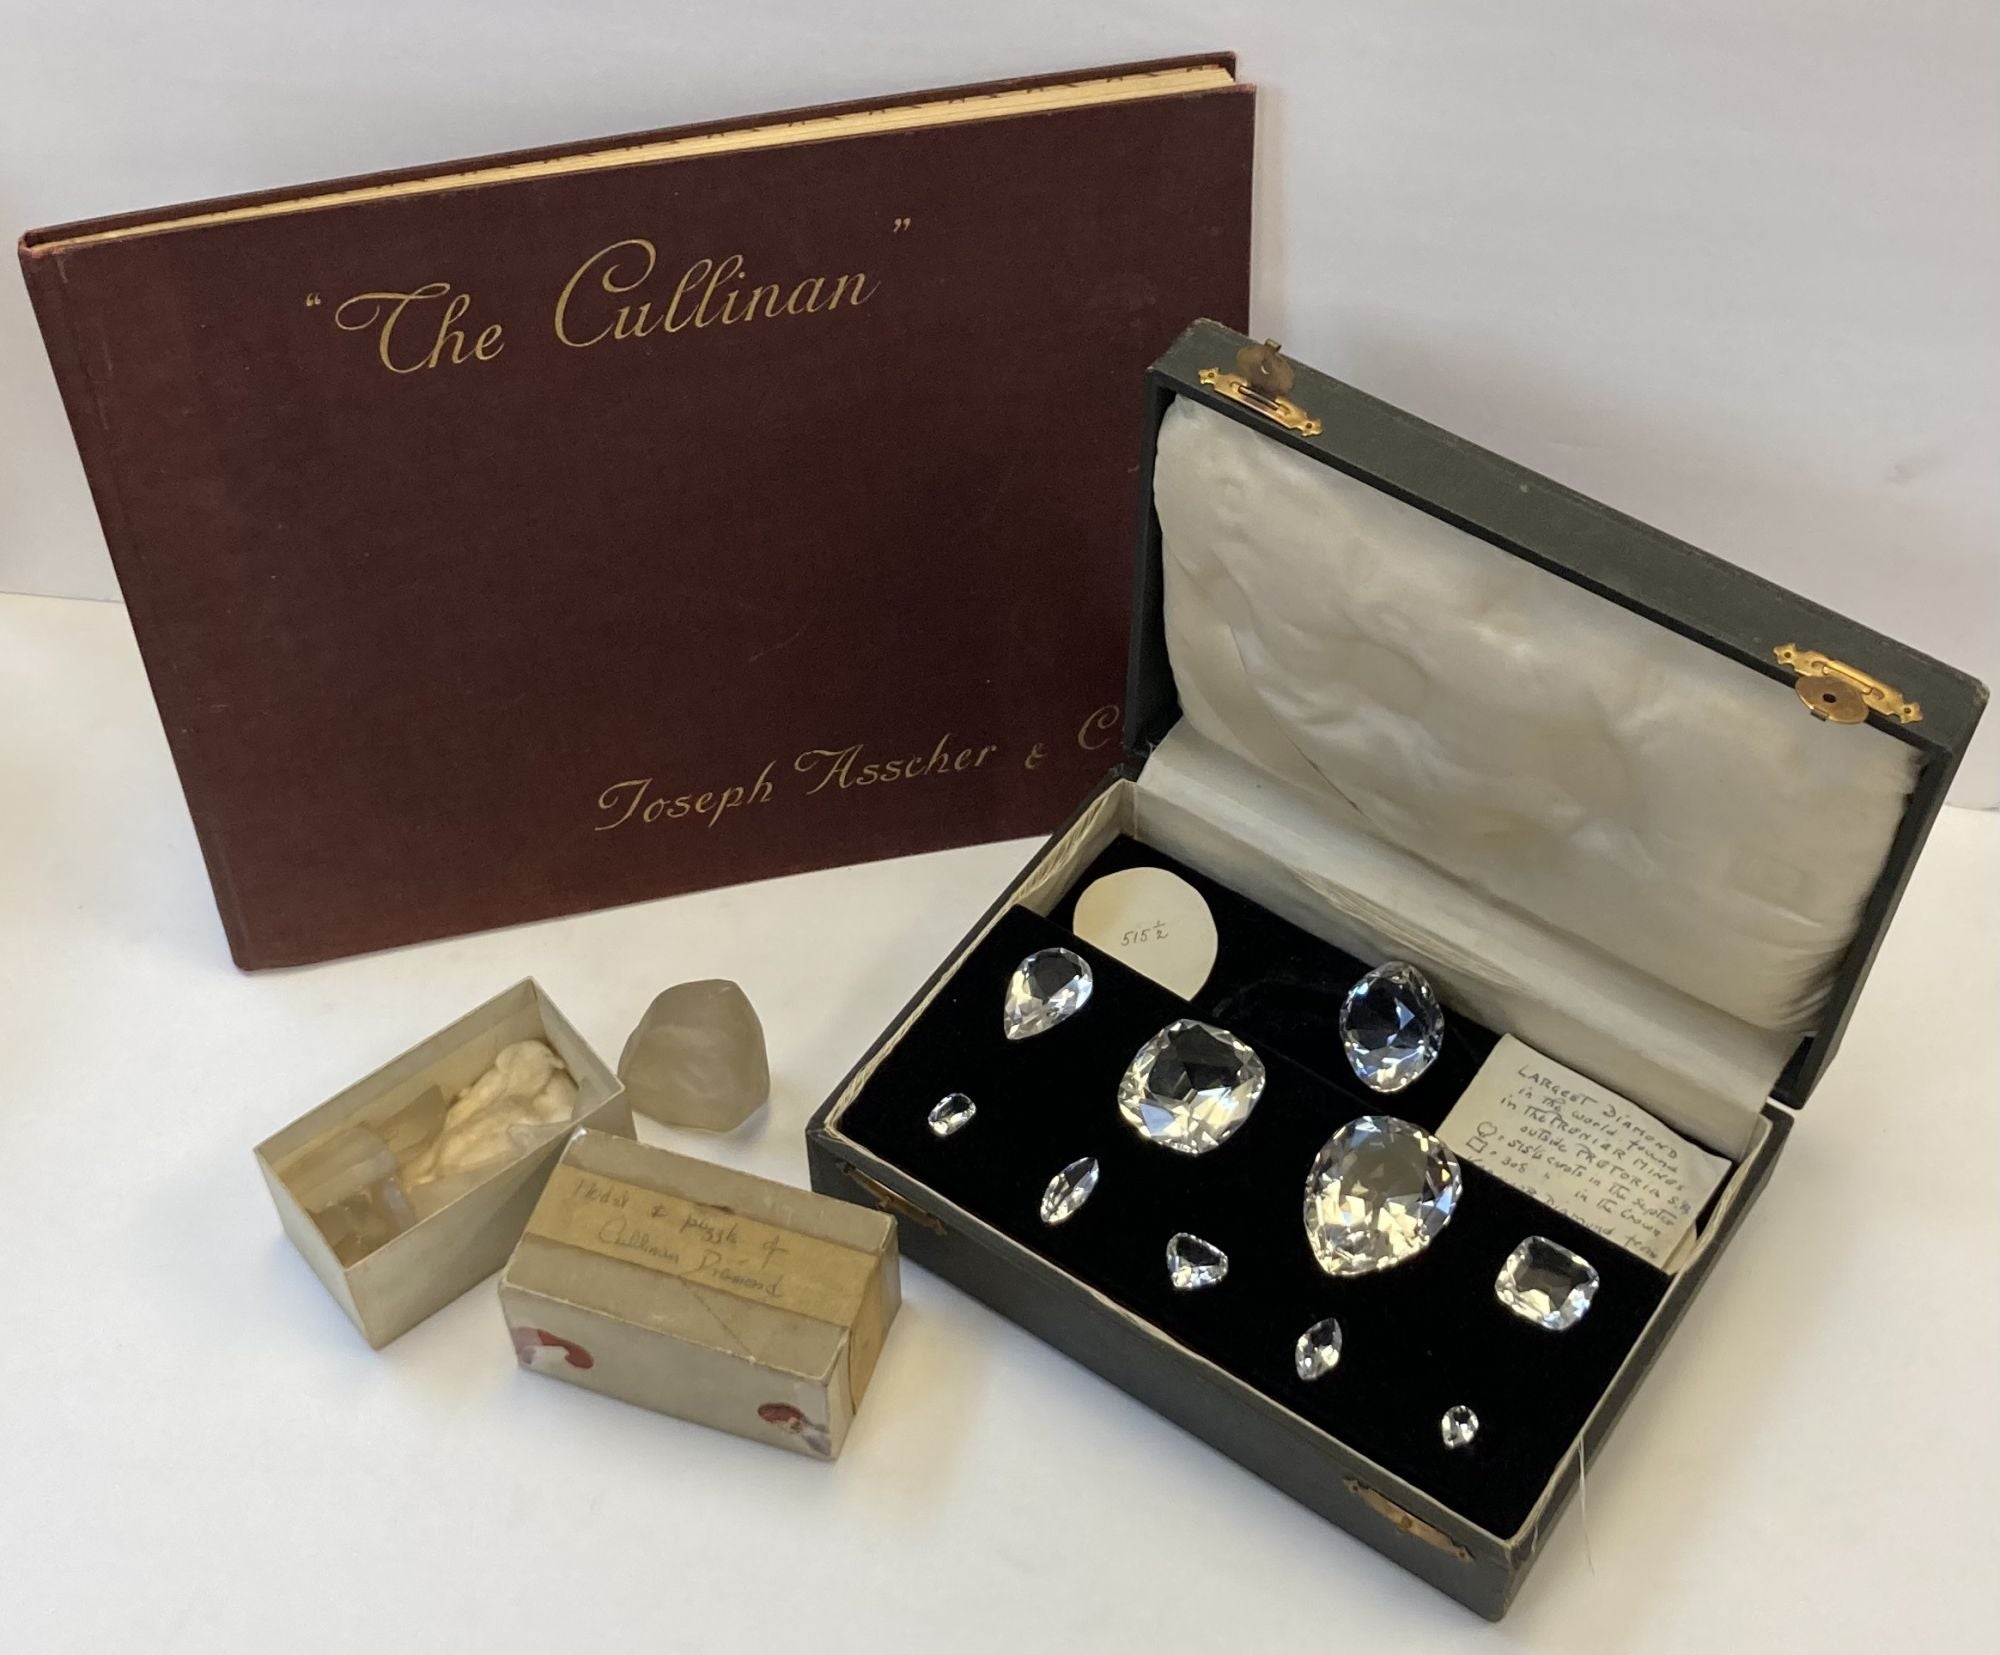 1364148 THE CULLINAN [WITH] SET OF GLASS REPRODUCTIONS. Joseph Asscher, Cie.